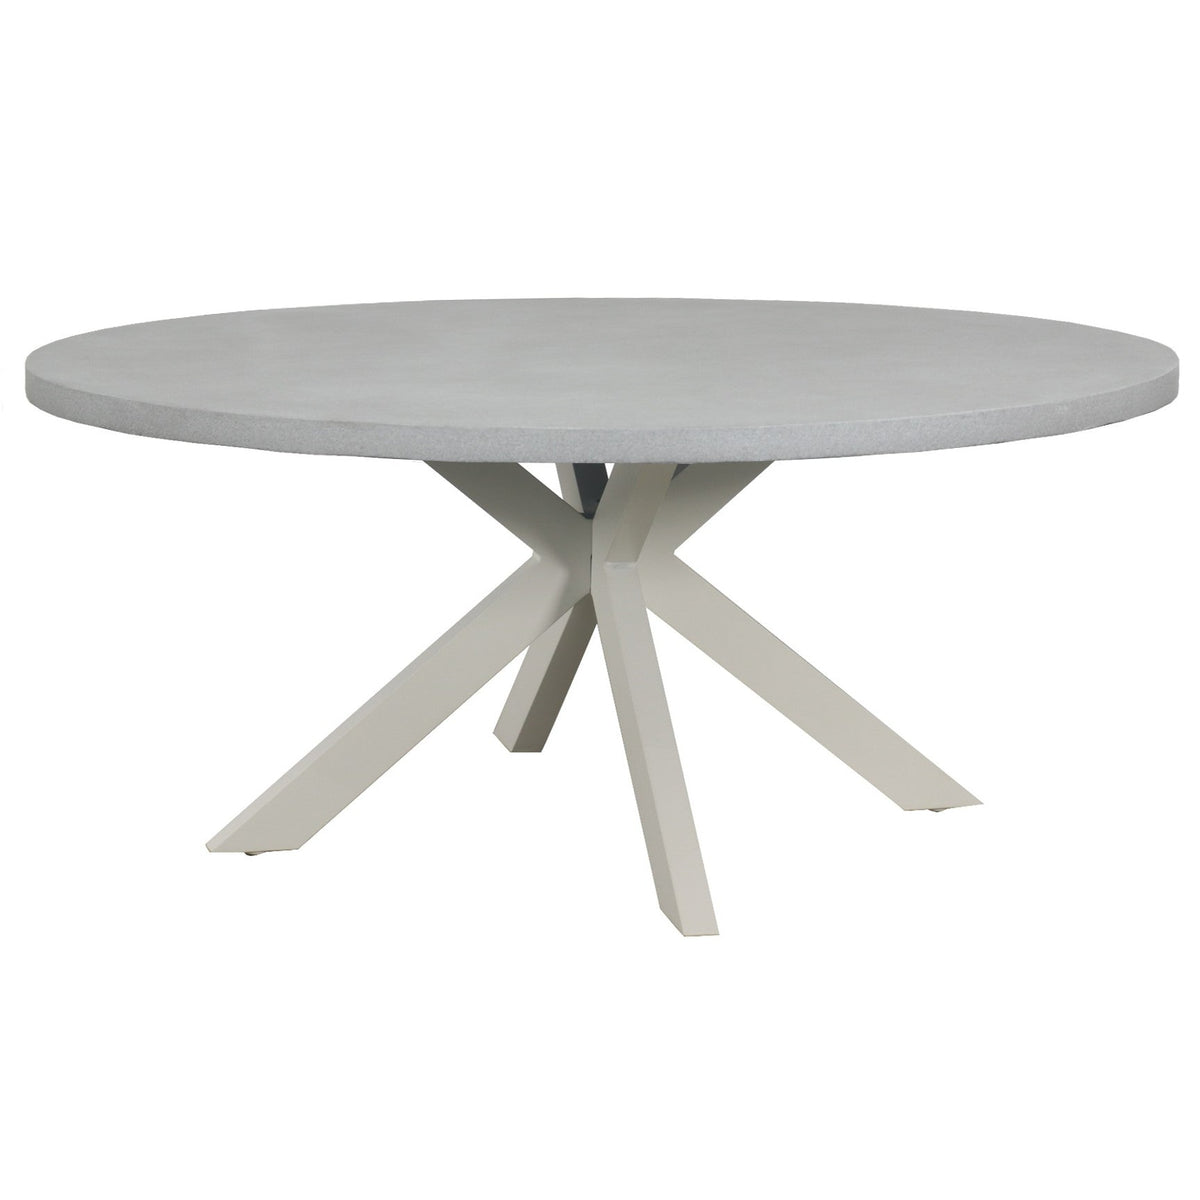 Round Cement Dining Table 1500mm